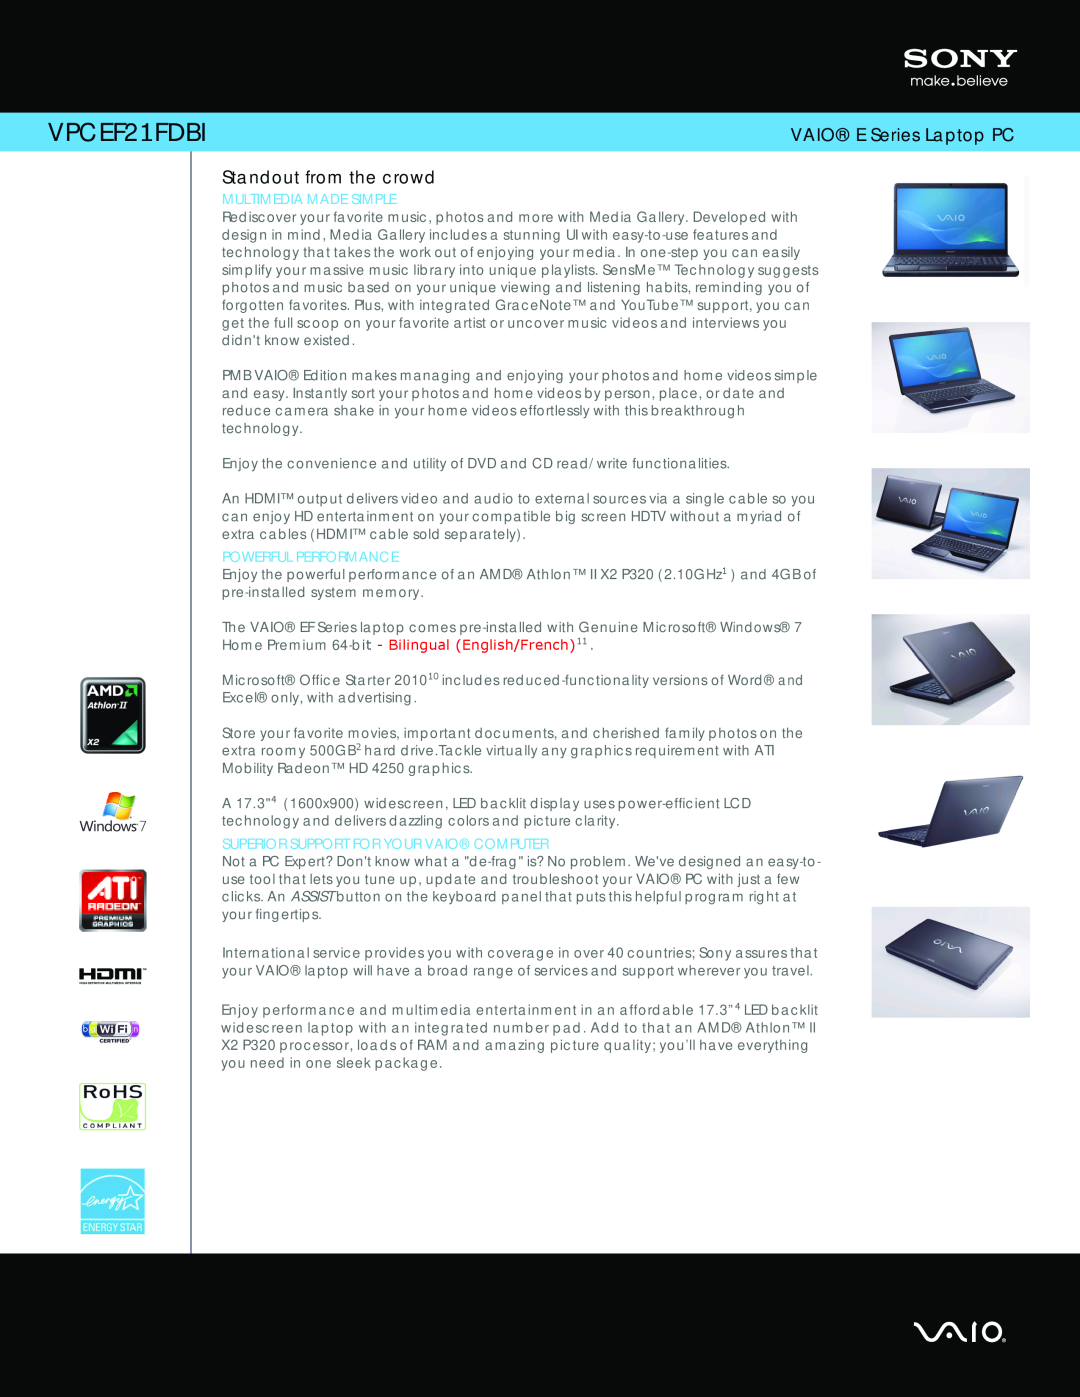 Sony VPCEF21FDBI manual VAIO E Series Laptop PC, Standout from the crowd, Multimedia Made Simple, Powerful Performance 